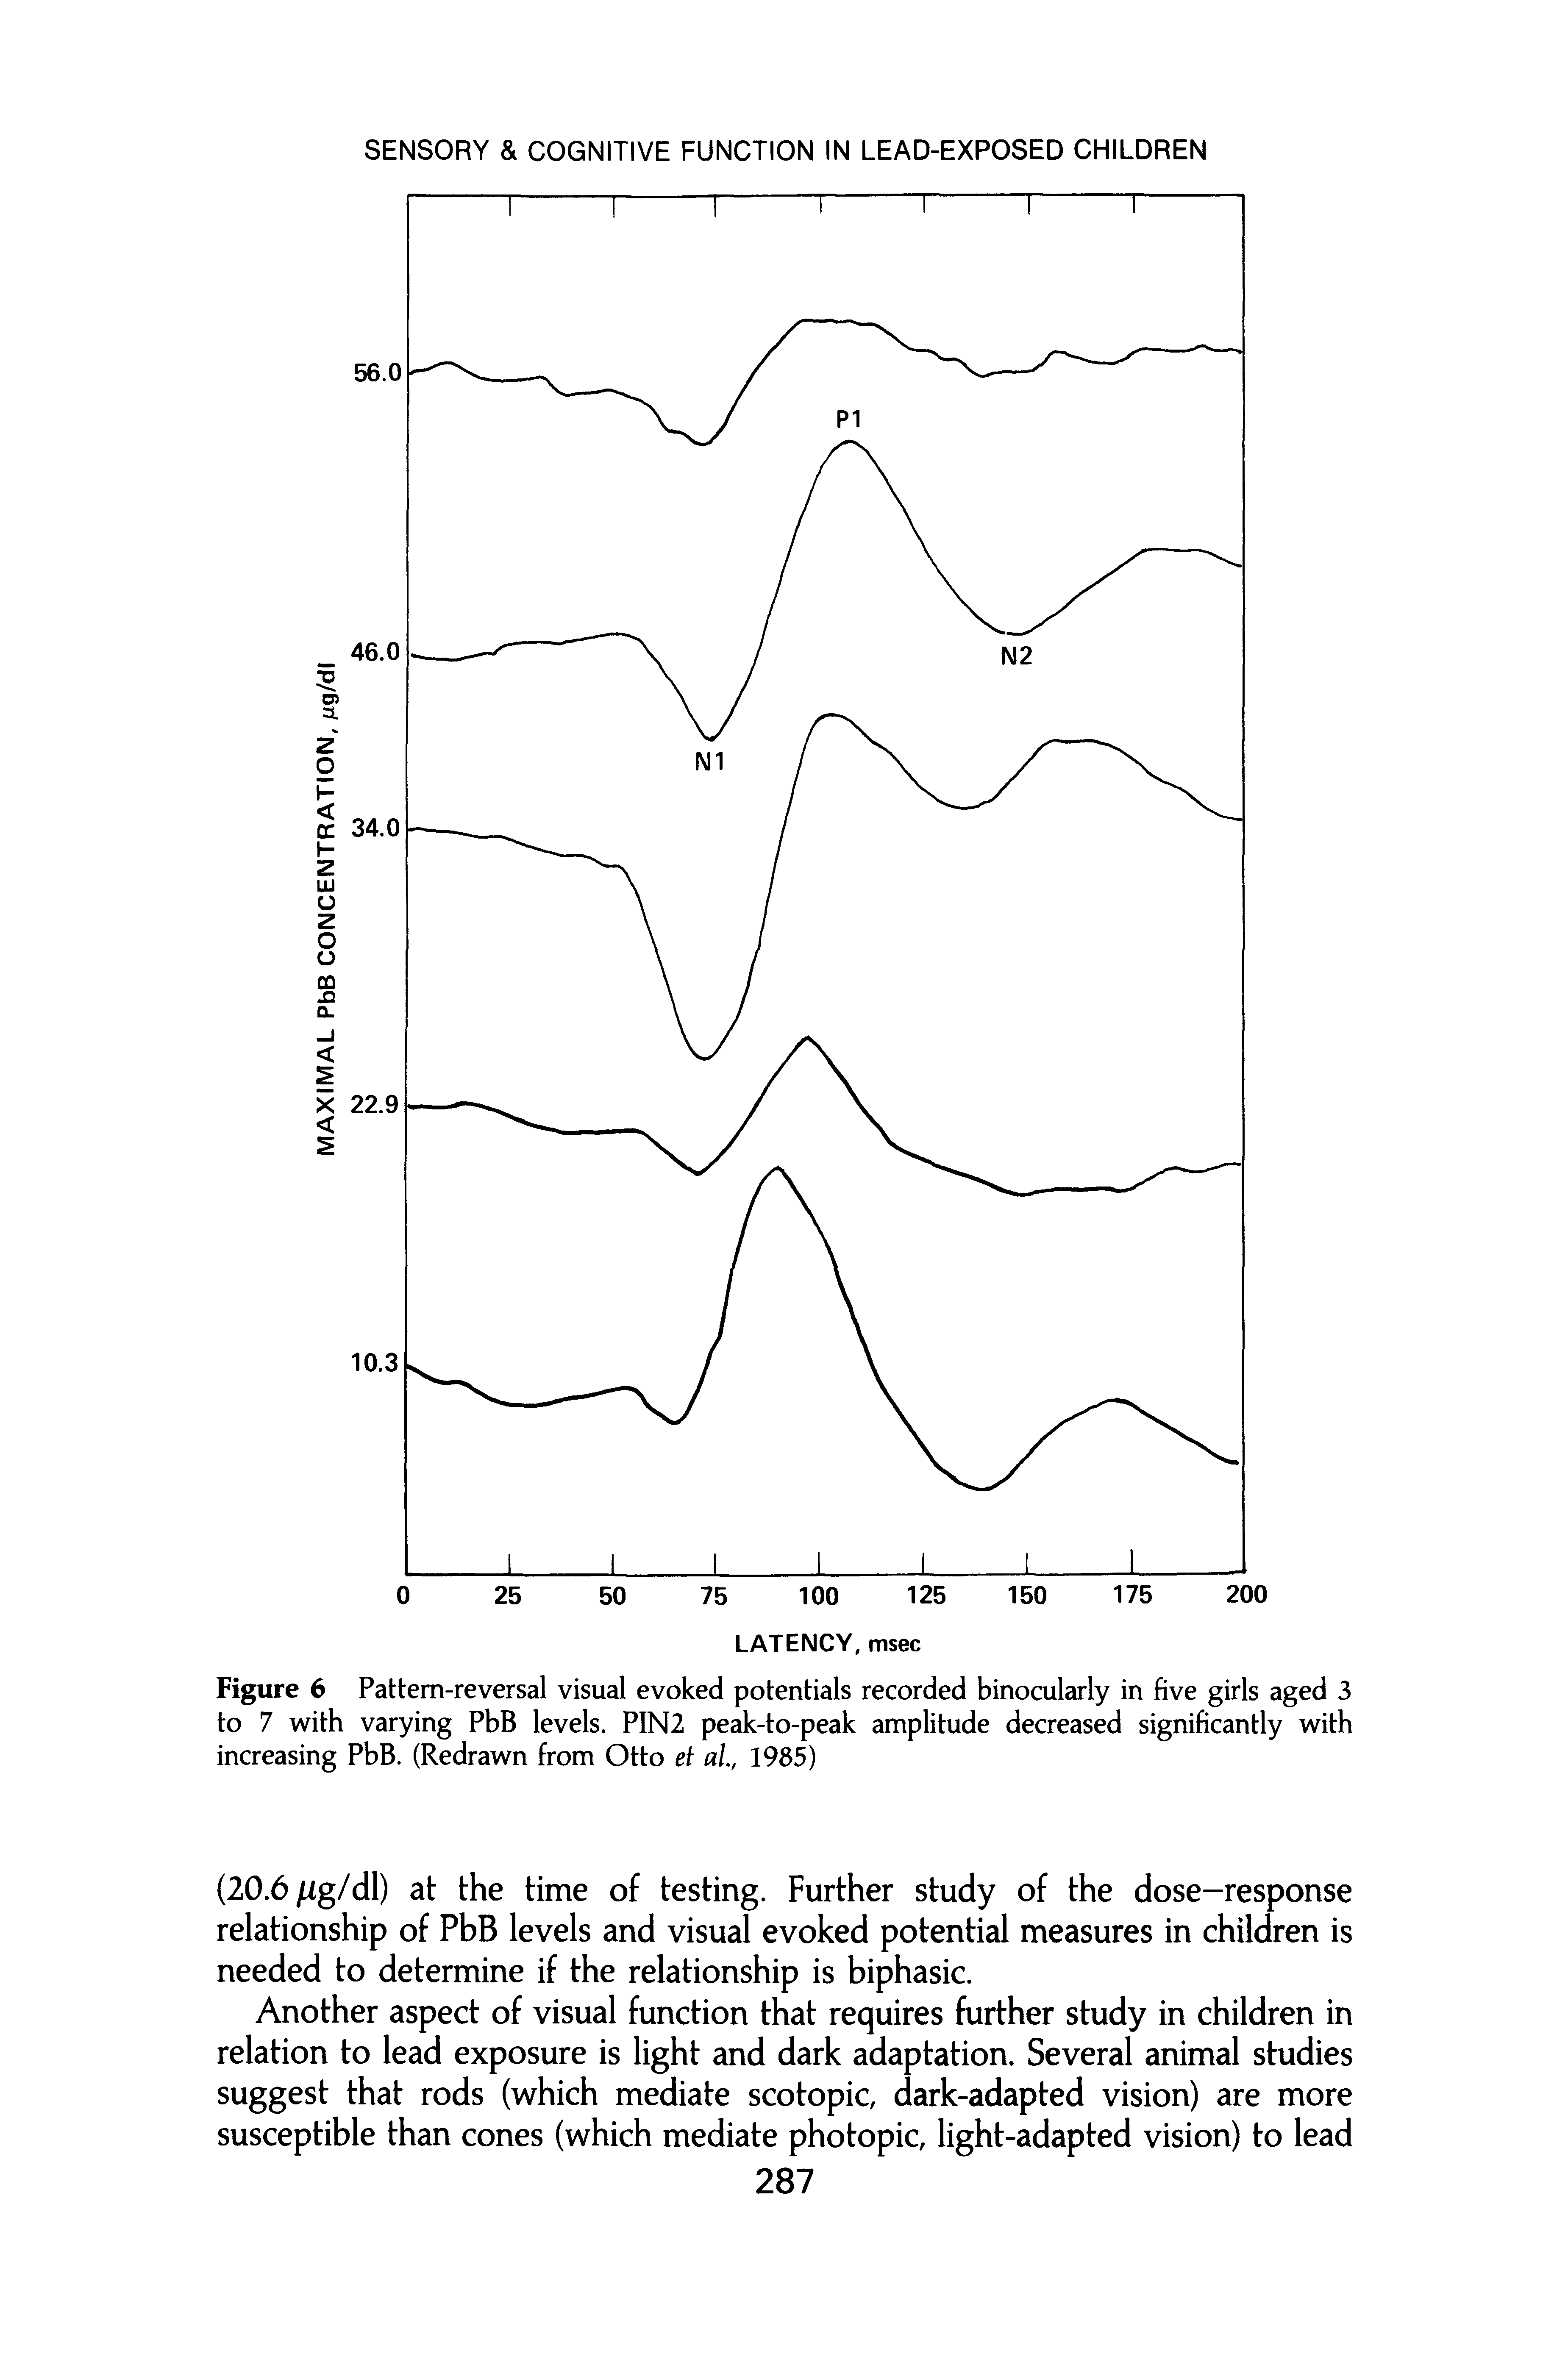 Figure 6 Pattern-reversal visual evoked potentials recorded binocularly in five girls aged 3 to 7 with varying PbB levels. PIN2 peak-to-peak amplitude decreased significantly with increasing PbB. (Redrawn from Otto et al, 1985)...